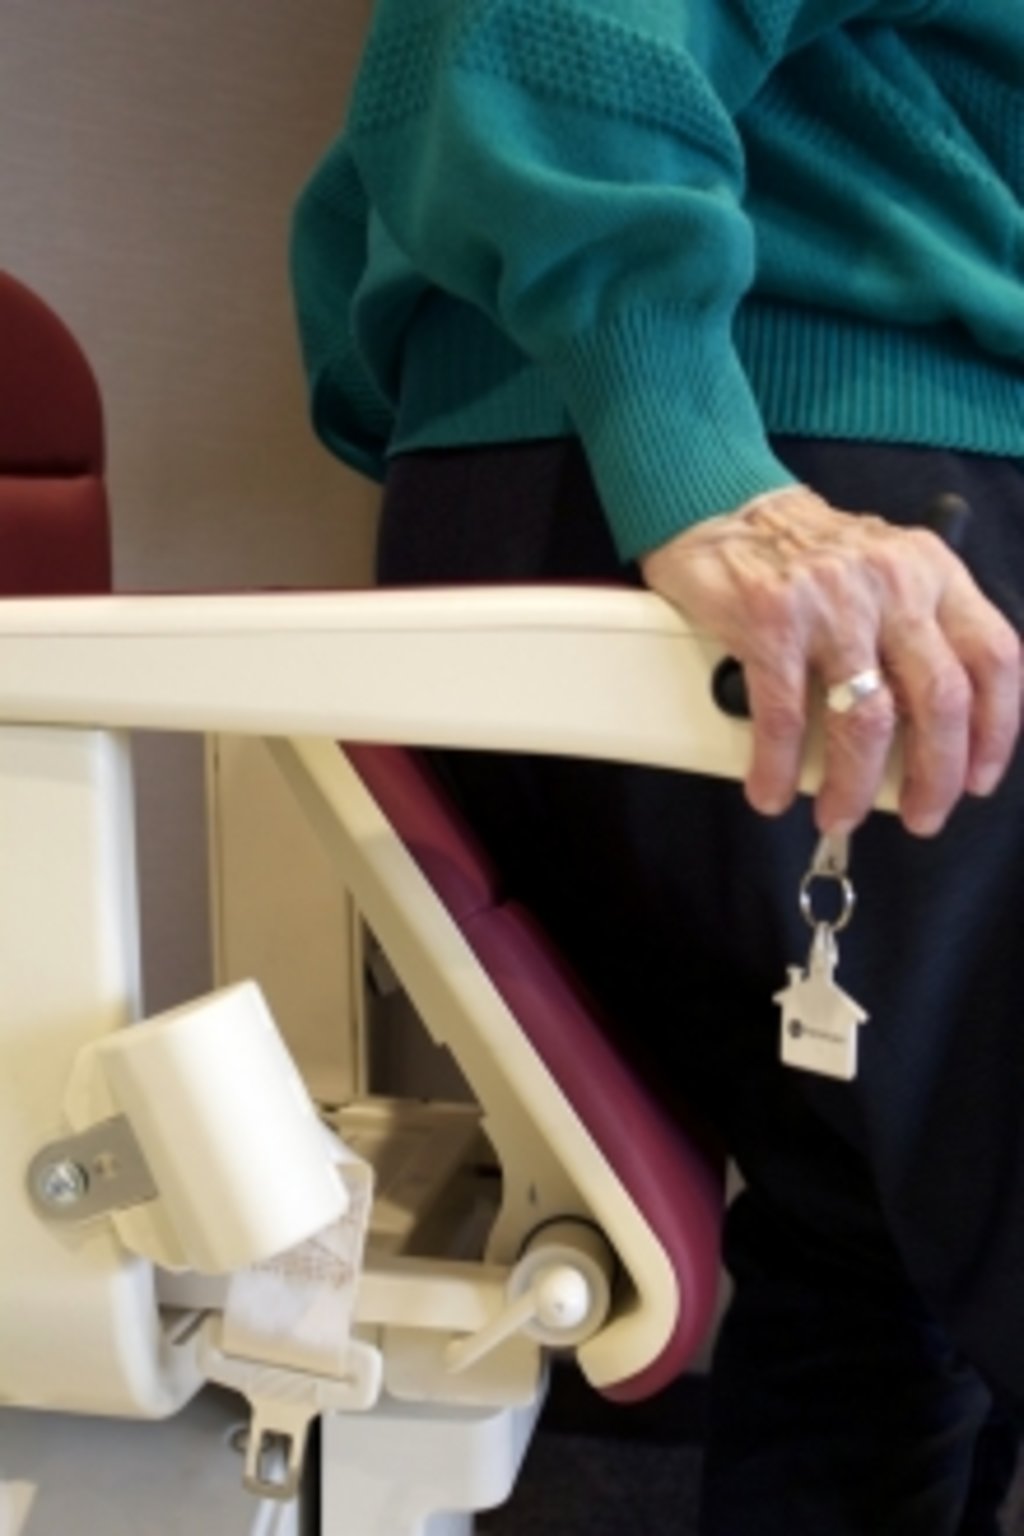 Stairlift optional features mean more people can "turn and go"